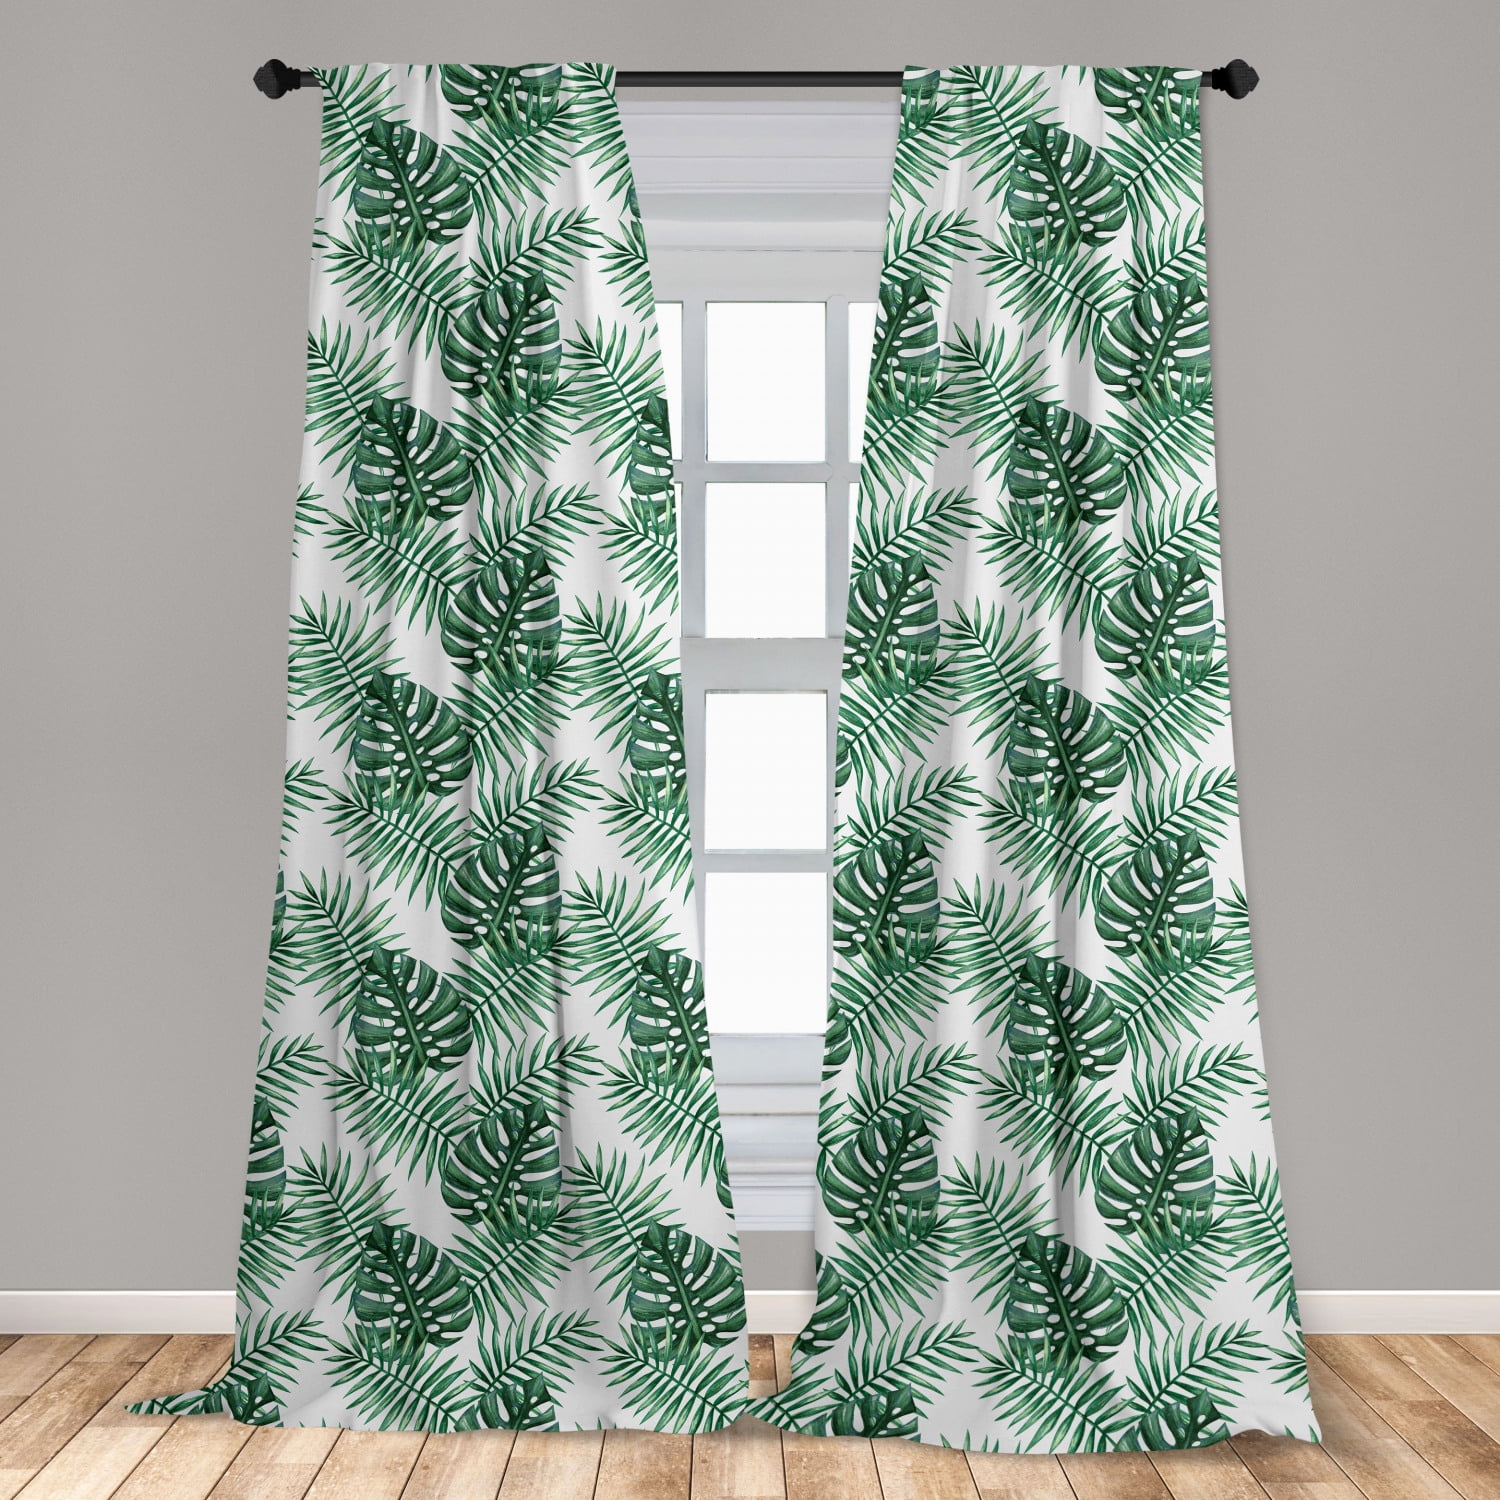 Green Tropical Palm Leaf Jungle Curtains for Children Bedroom,Eyelet Blackout Curtains for Nursery/Short Window for Home Decor,54£¨H£©x 55 in,2 Panels W